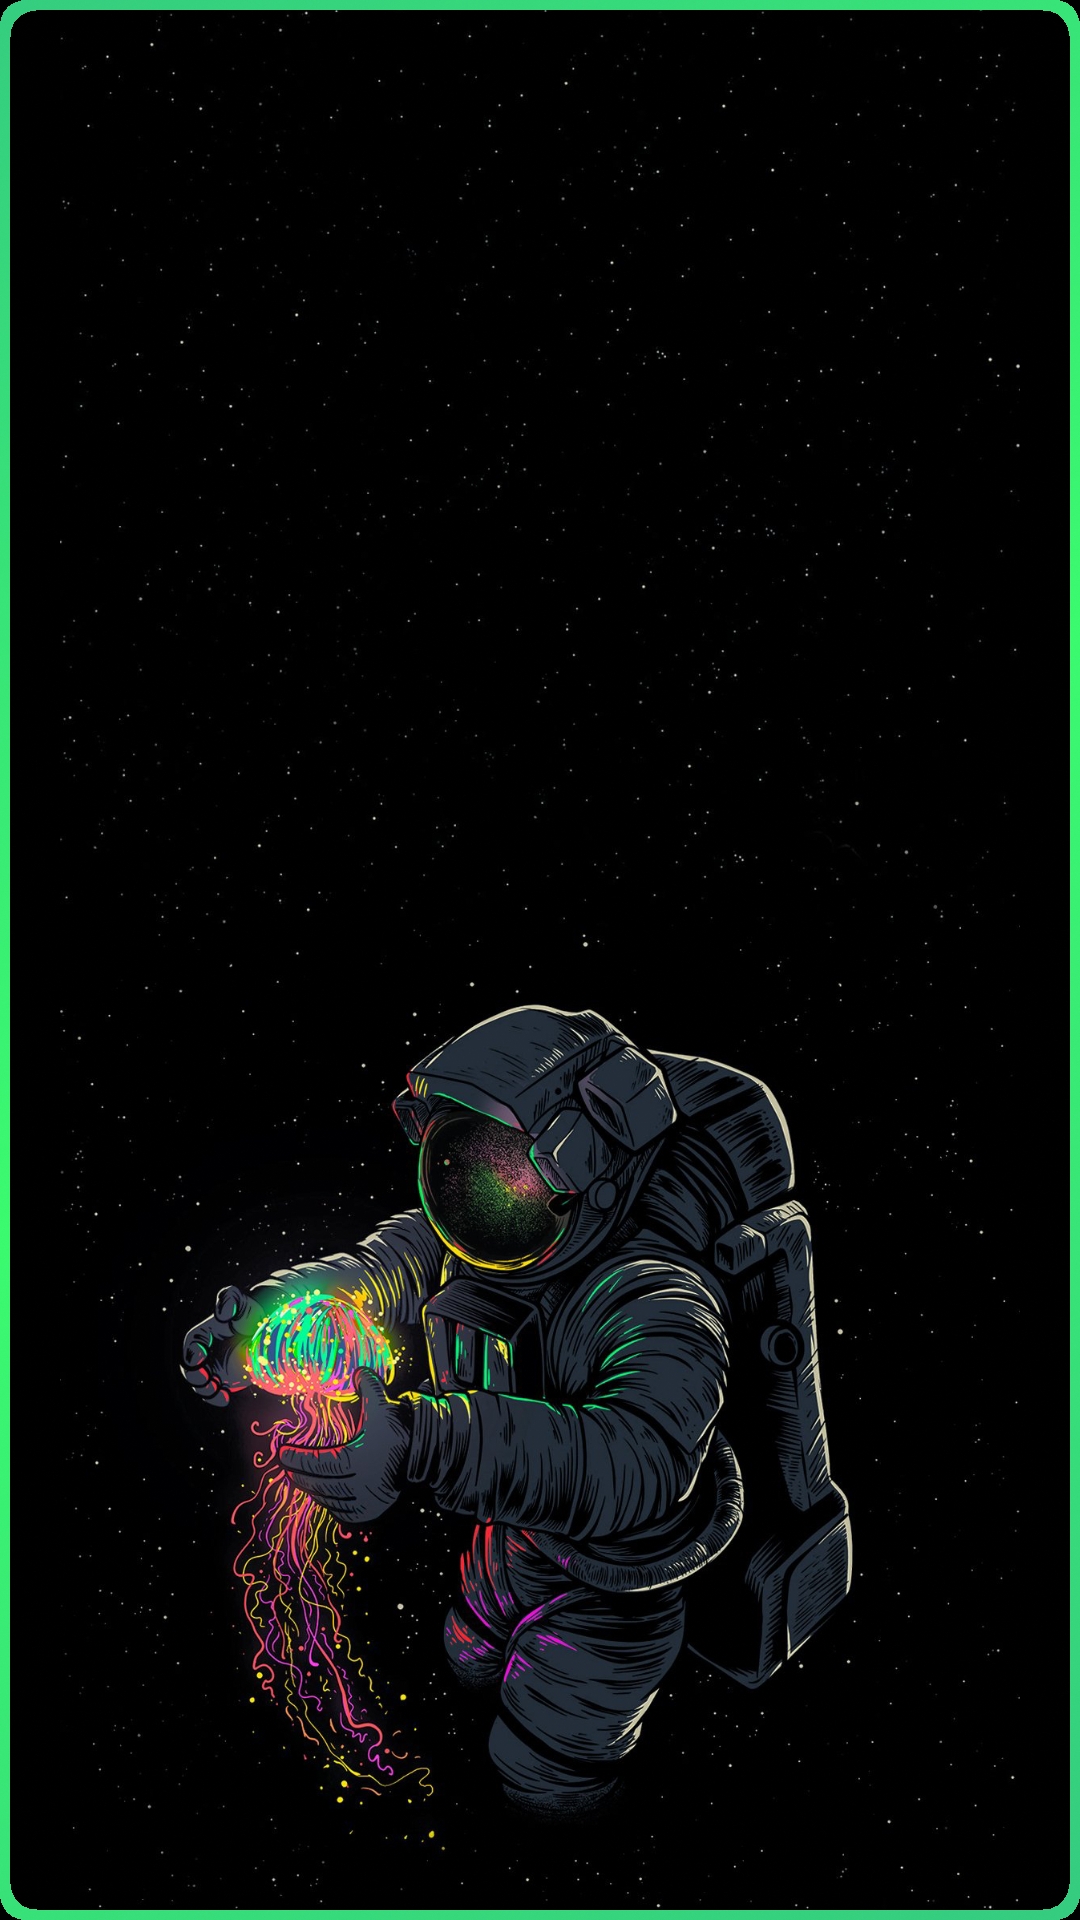 Edited this into a amoled wallpaper and added the coloured border